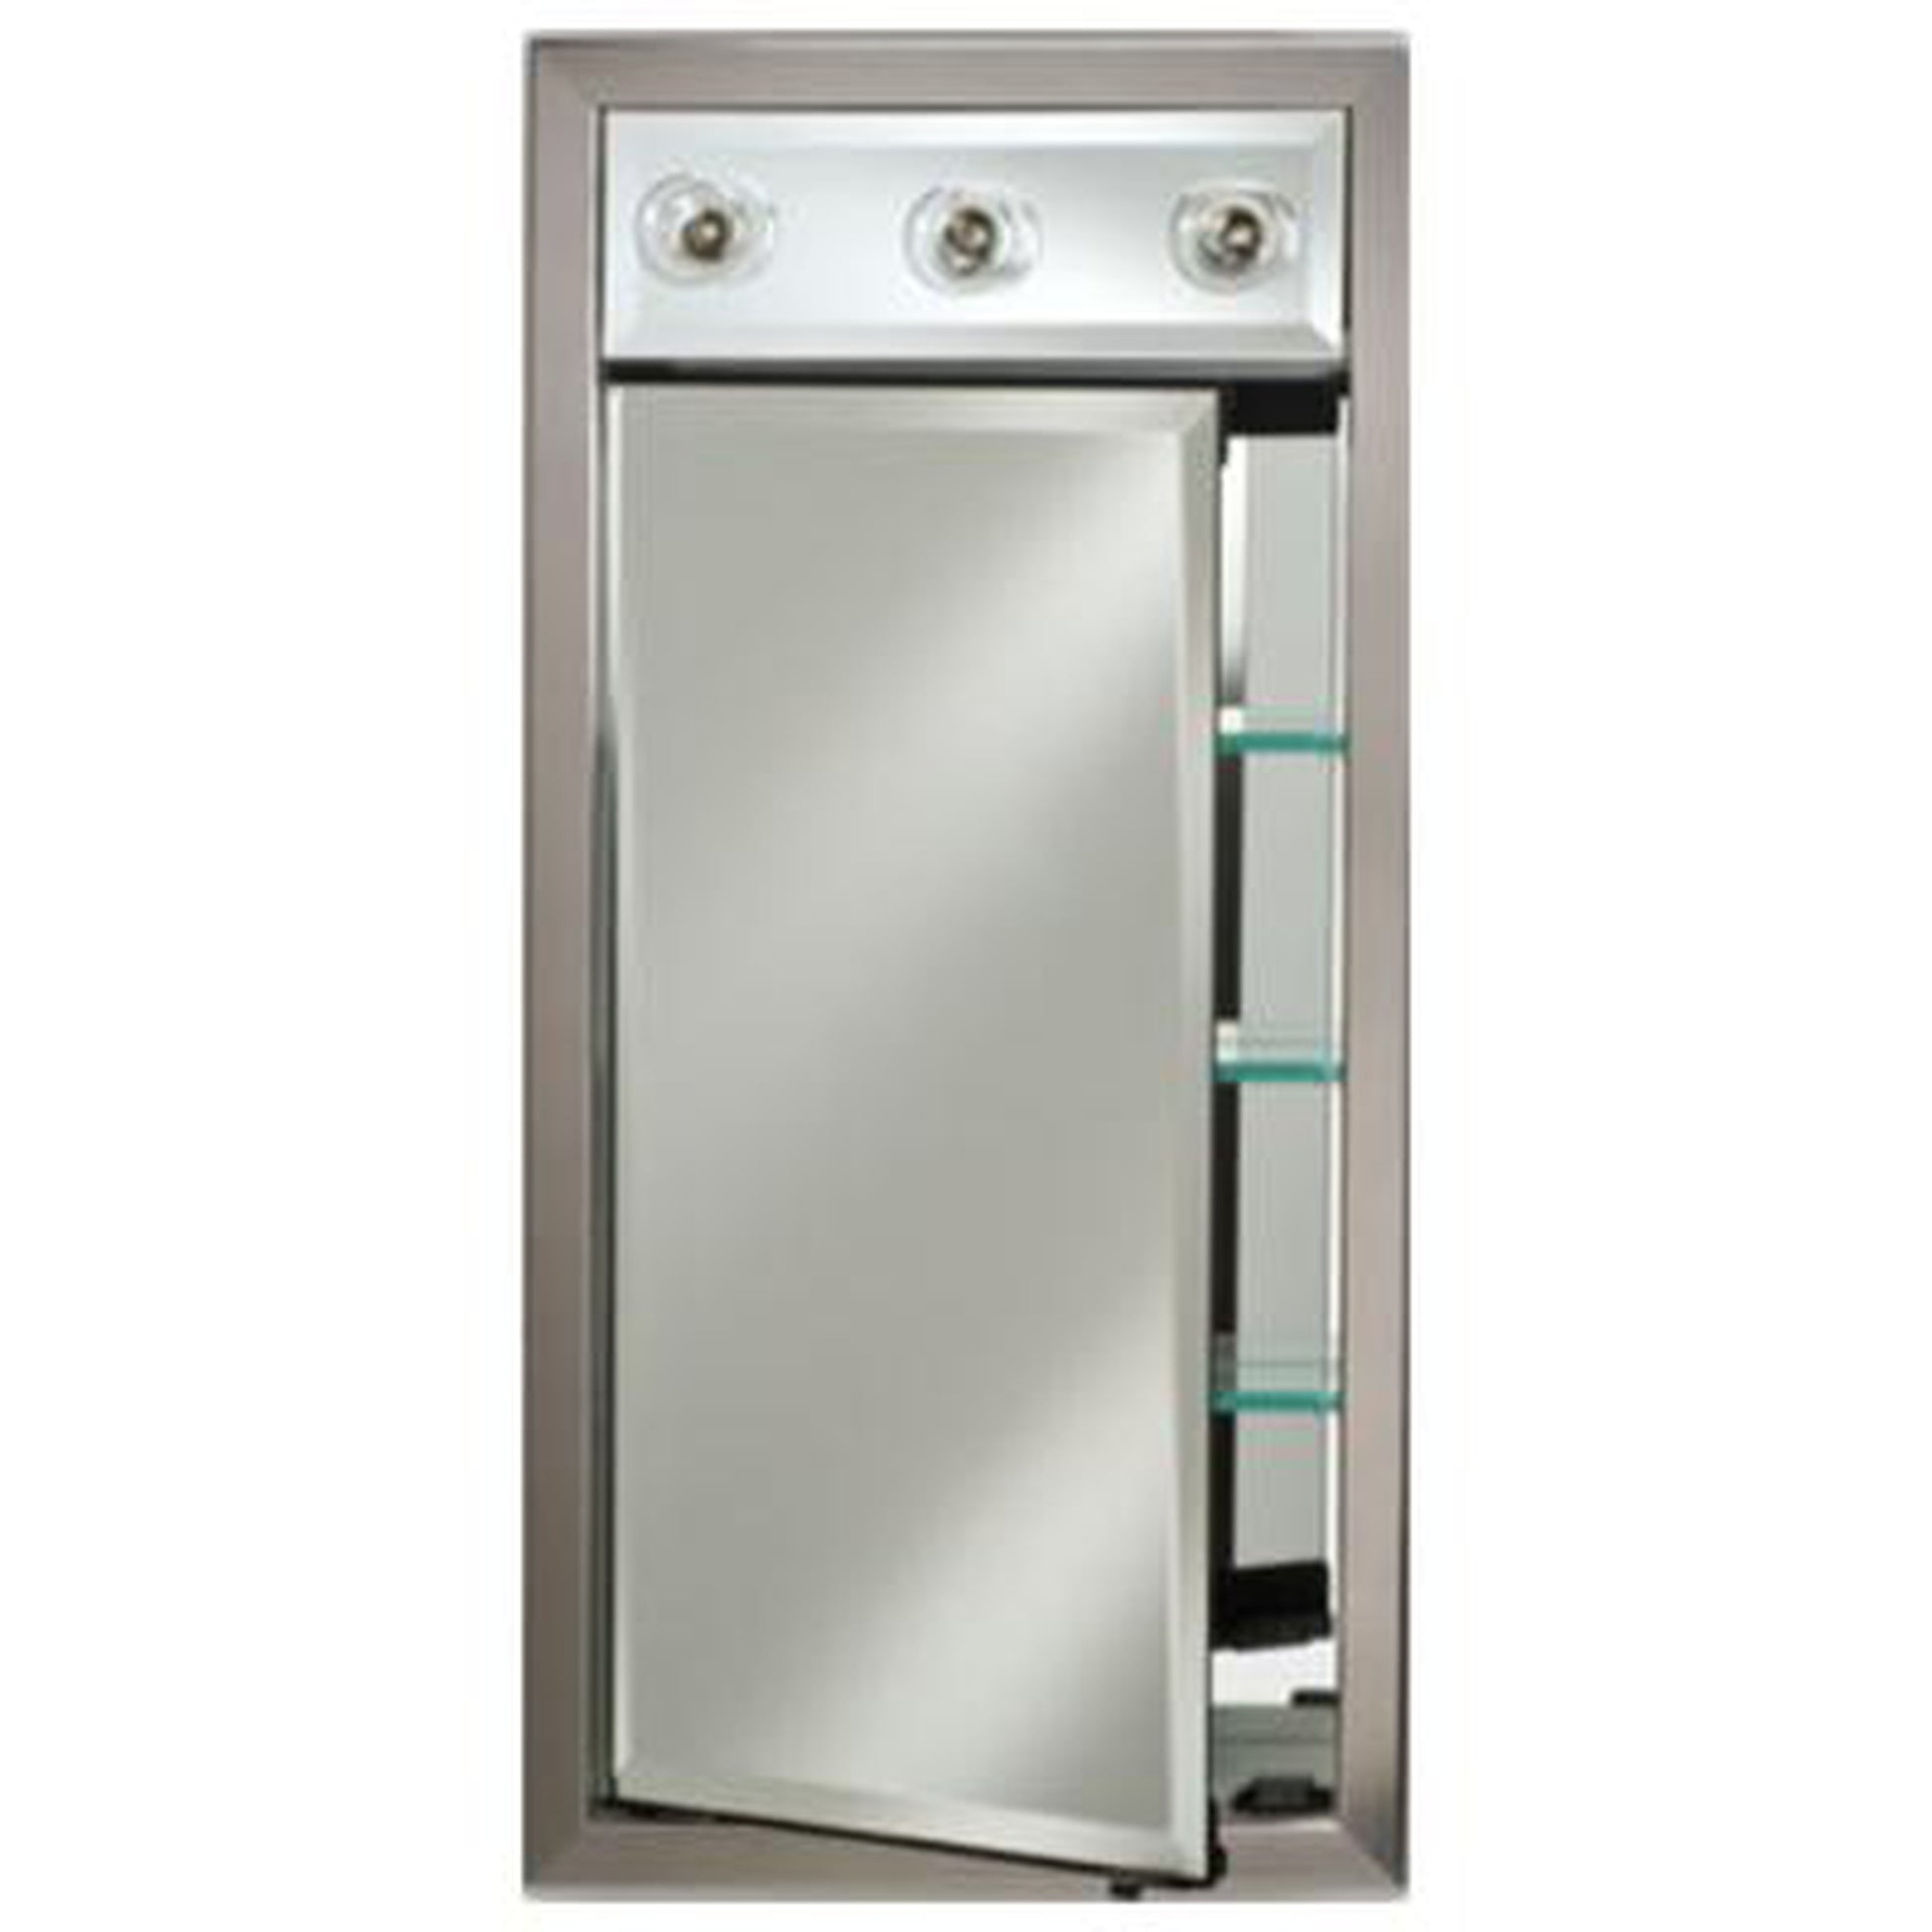 Afina Signature 17" x 30" Polished Glimmer-Flat Recessed Right Hinged Single Door Medicine Cabinet With Contemporary Lights